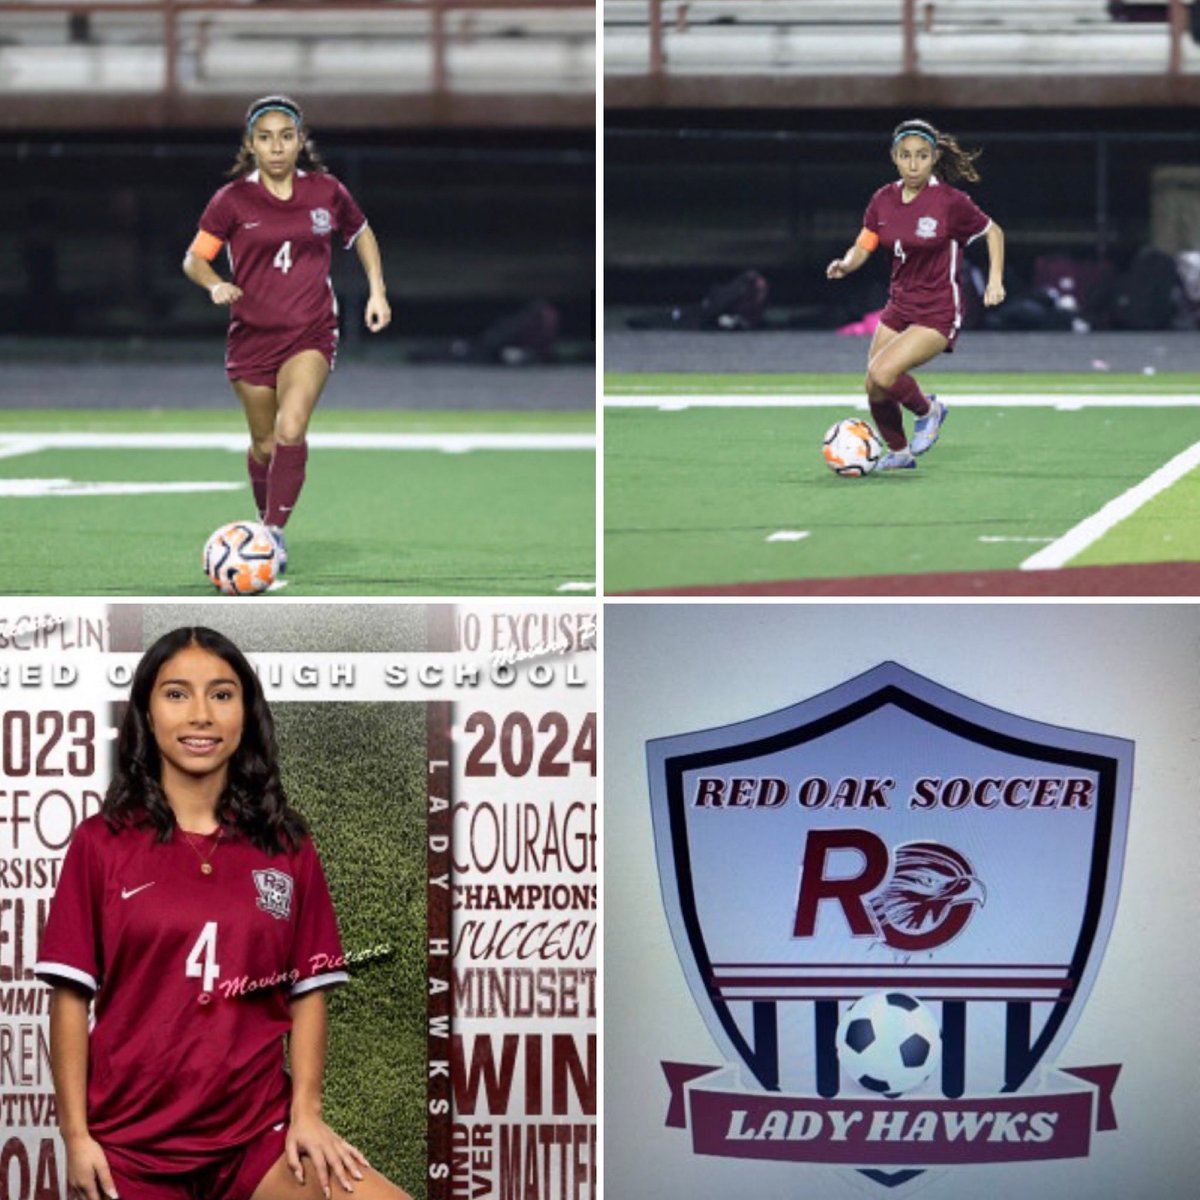 Congrats to #4 Sr. Captain Abrianna Salas for earning 1st team All district in 14-5A. 3 year starter at Holding Mid, AB has been the heartbeat of the team controlling possession and playing with so much heart. @roisdathletics @SportsDayHS @Abriann16 @tascosoccer @EllisCoSports